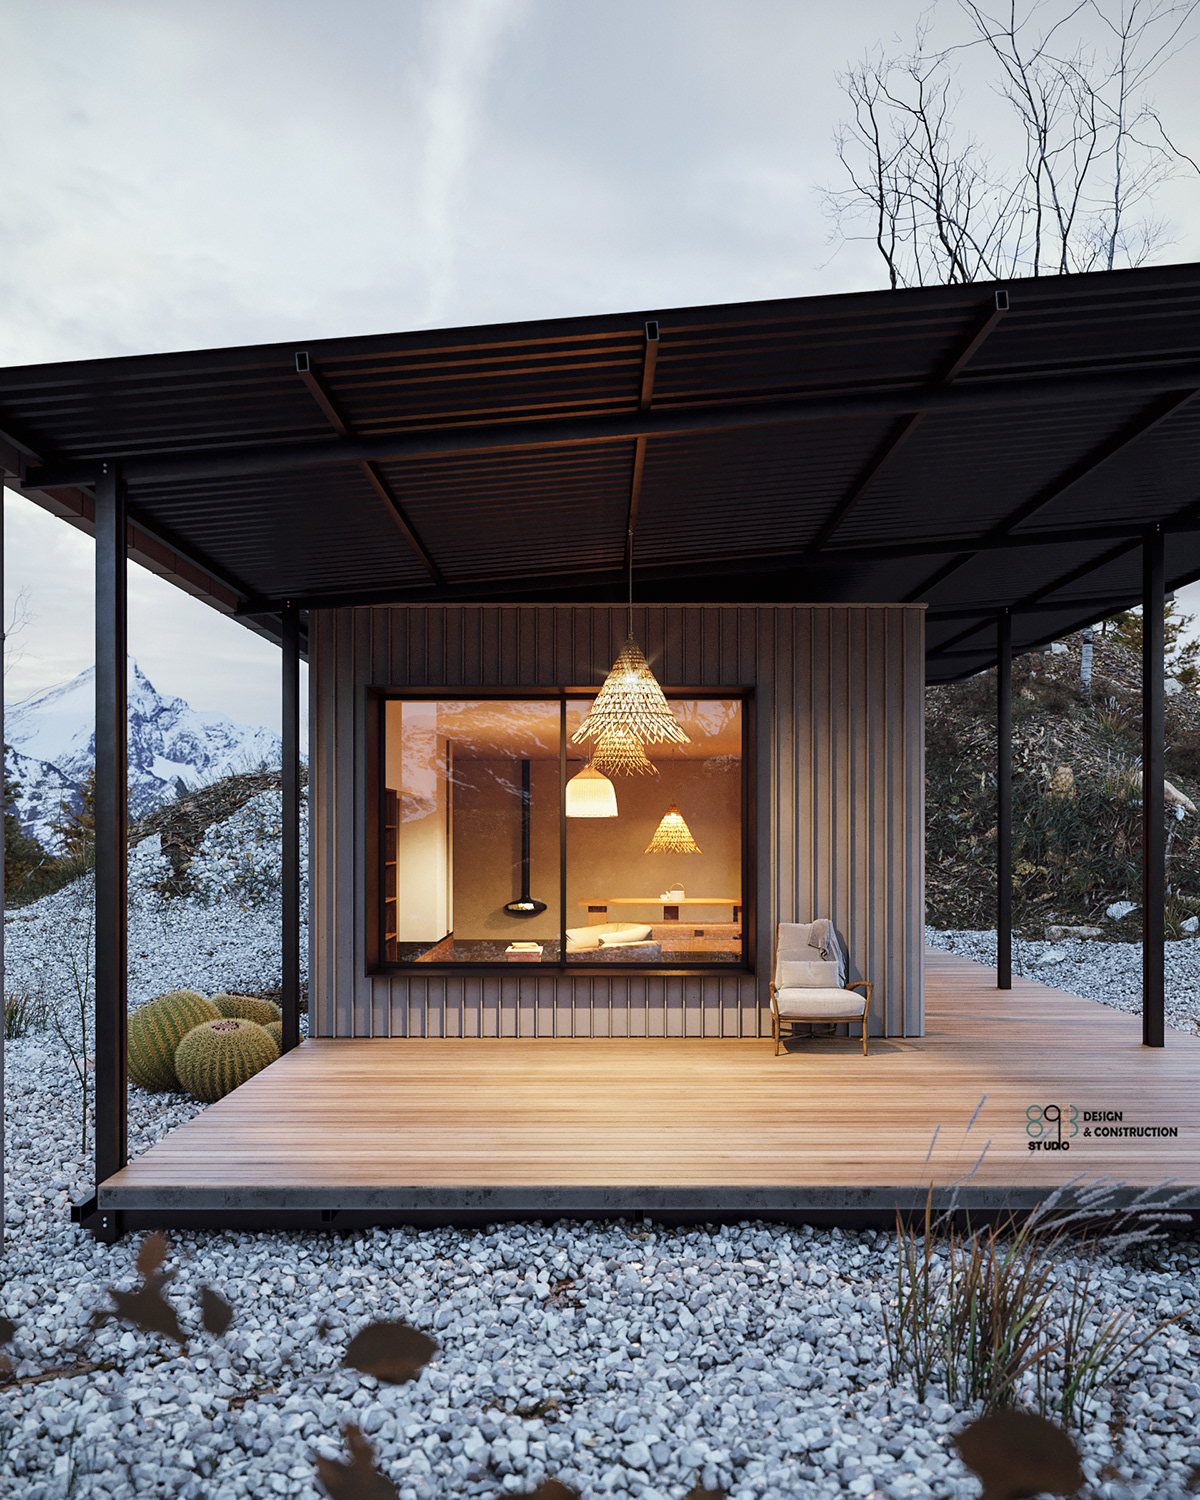 12 Mountain-cabin house |CGI and Free Design